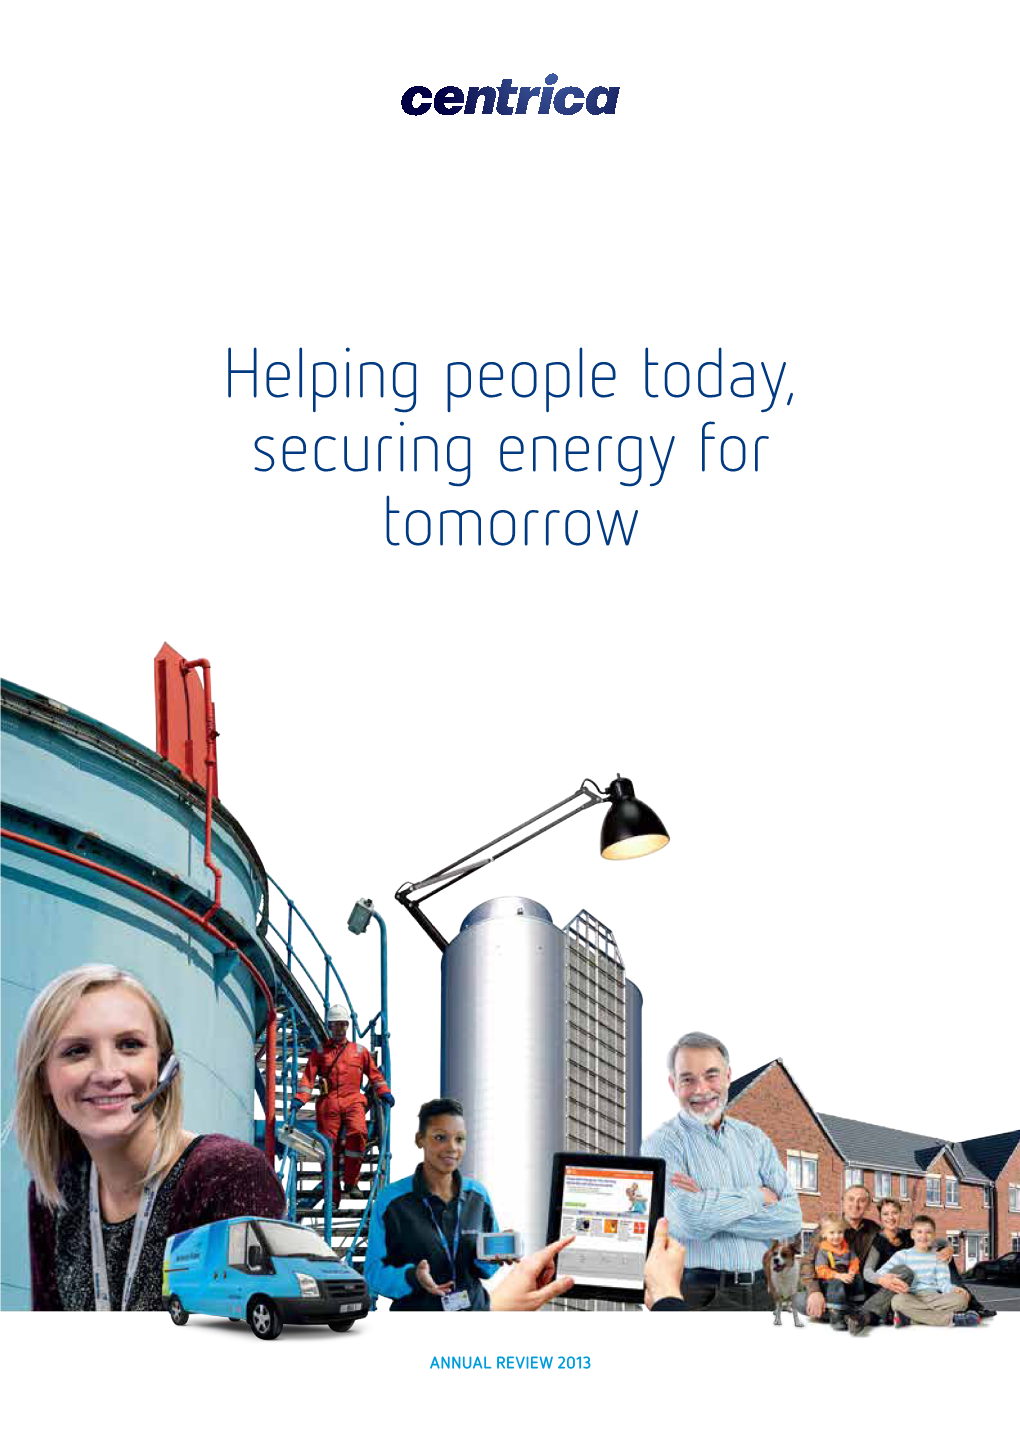 Centrica Annual Review 2013